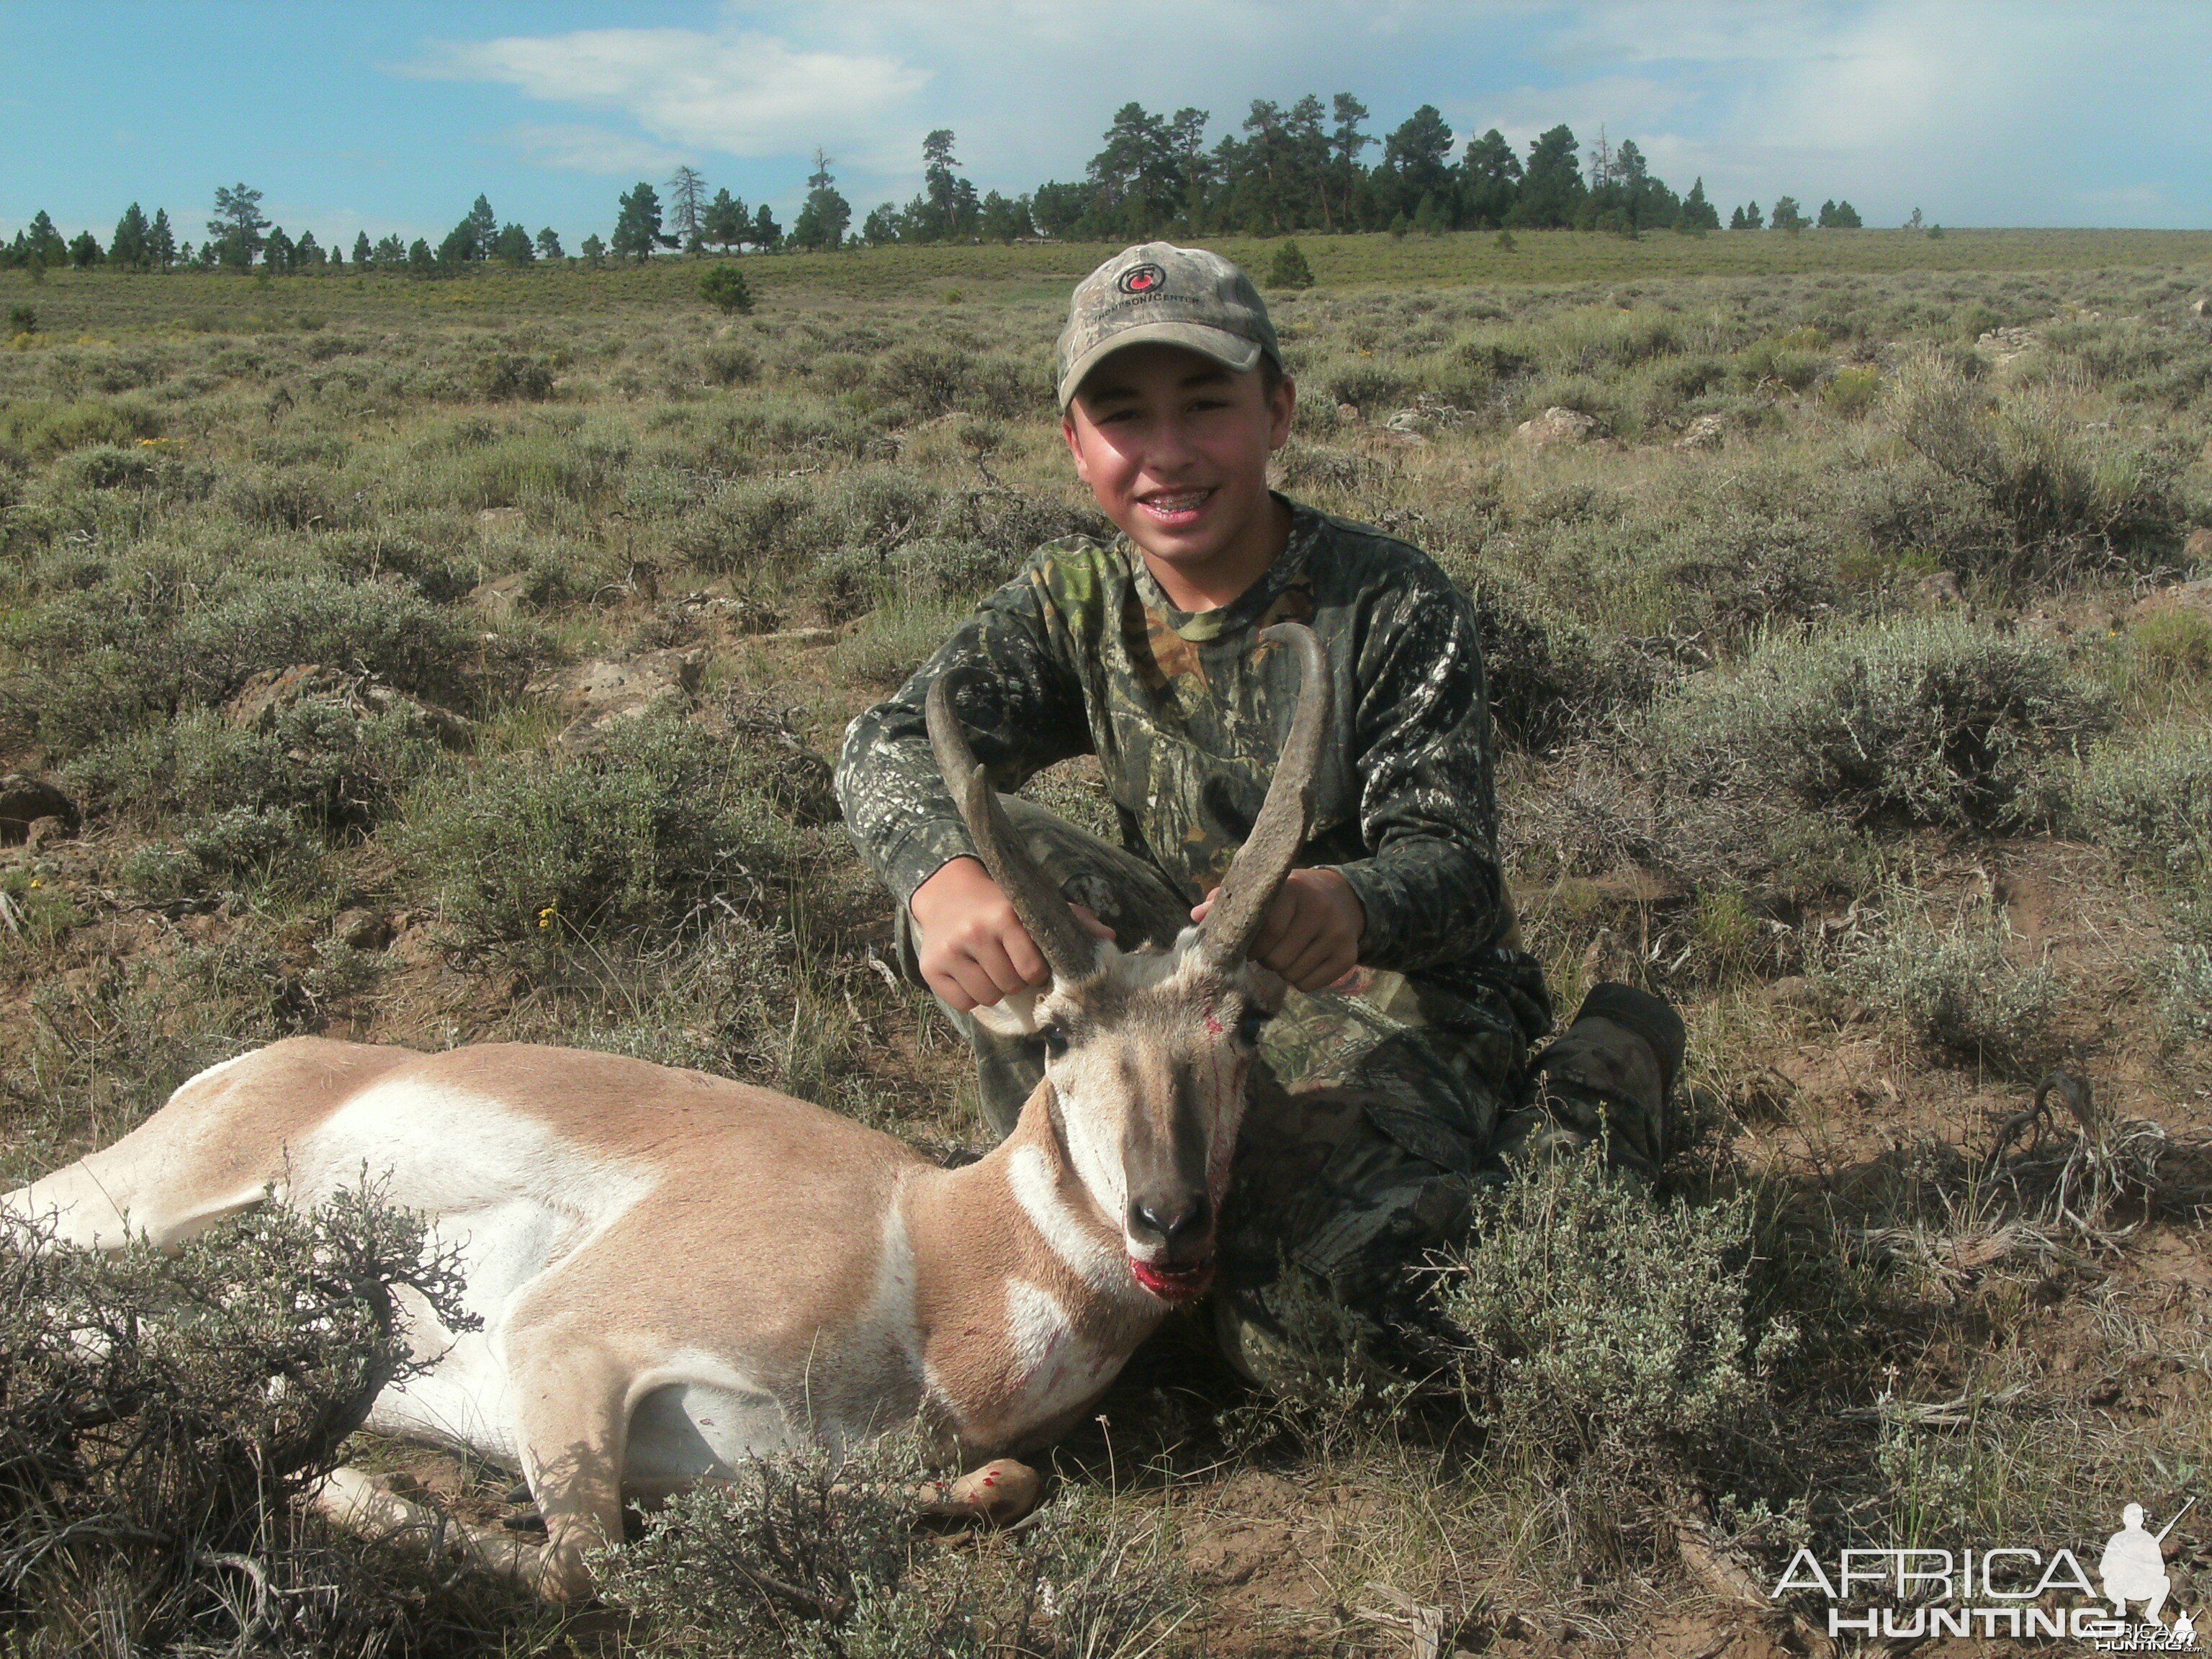 First speedgoat taken with his muzzleloader